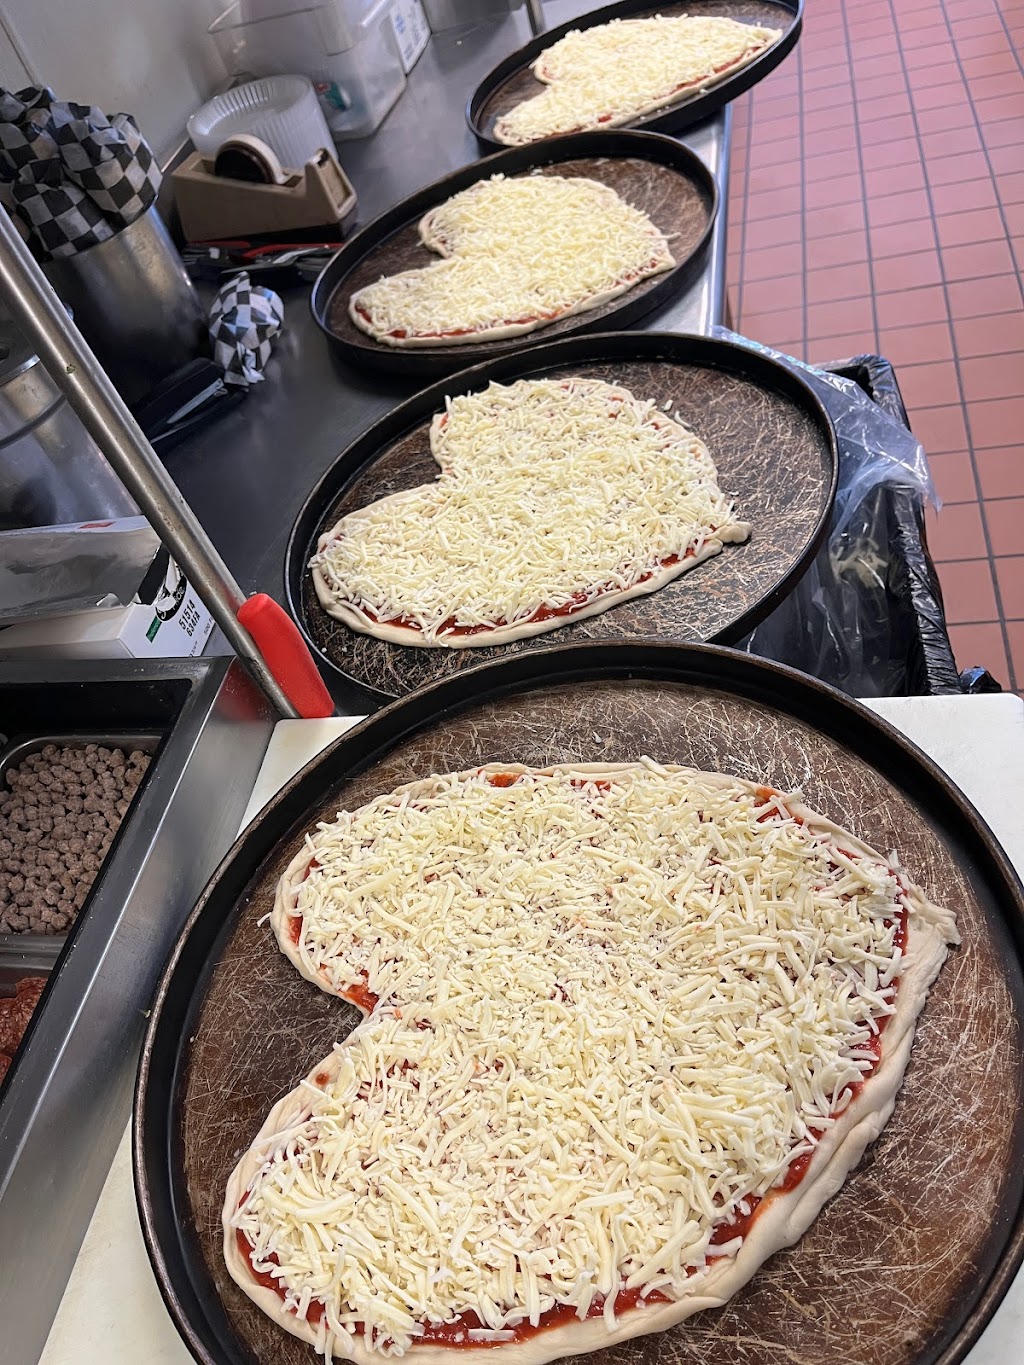 Middletown Pizza and Grill | 5715, 5715, 20 S Pennell Rd, Media, PA 19063 | Phone: (610) 566-2767